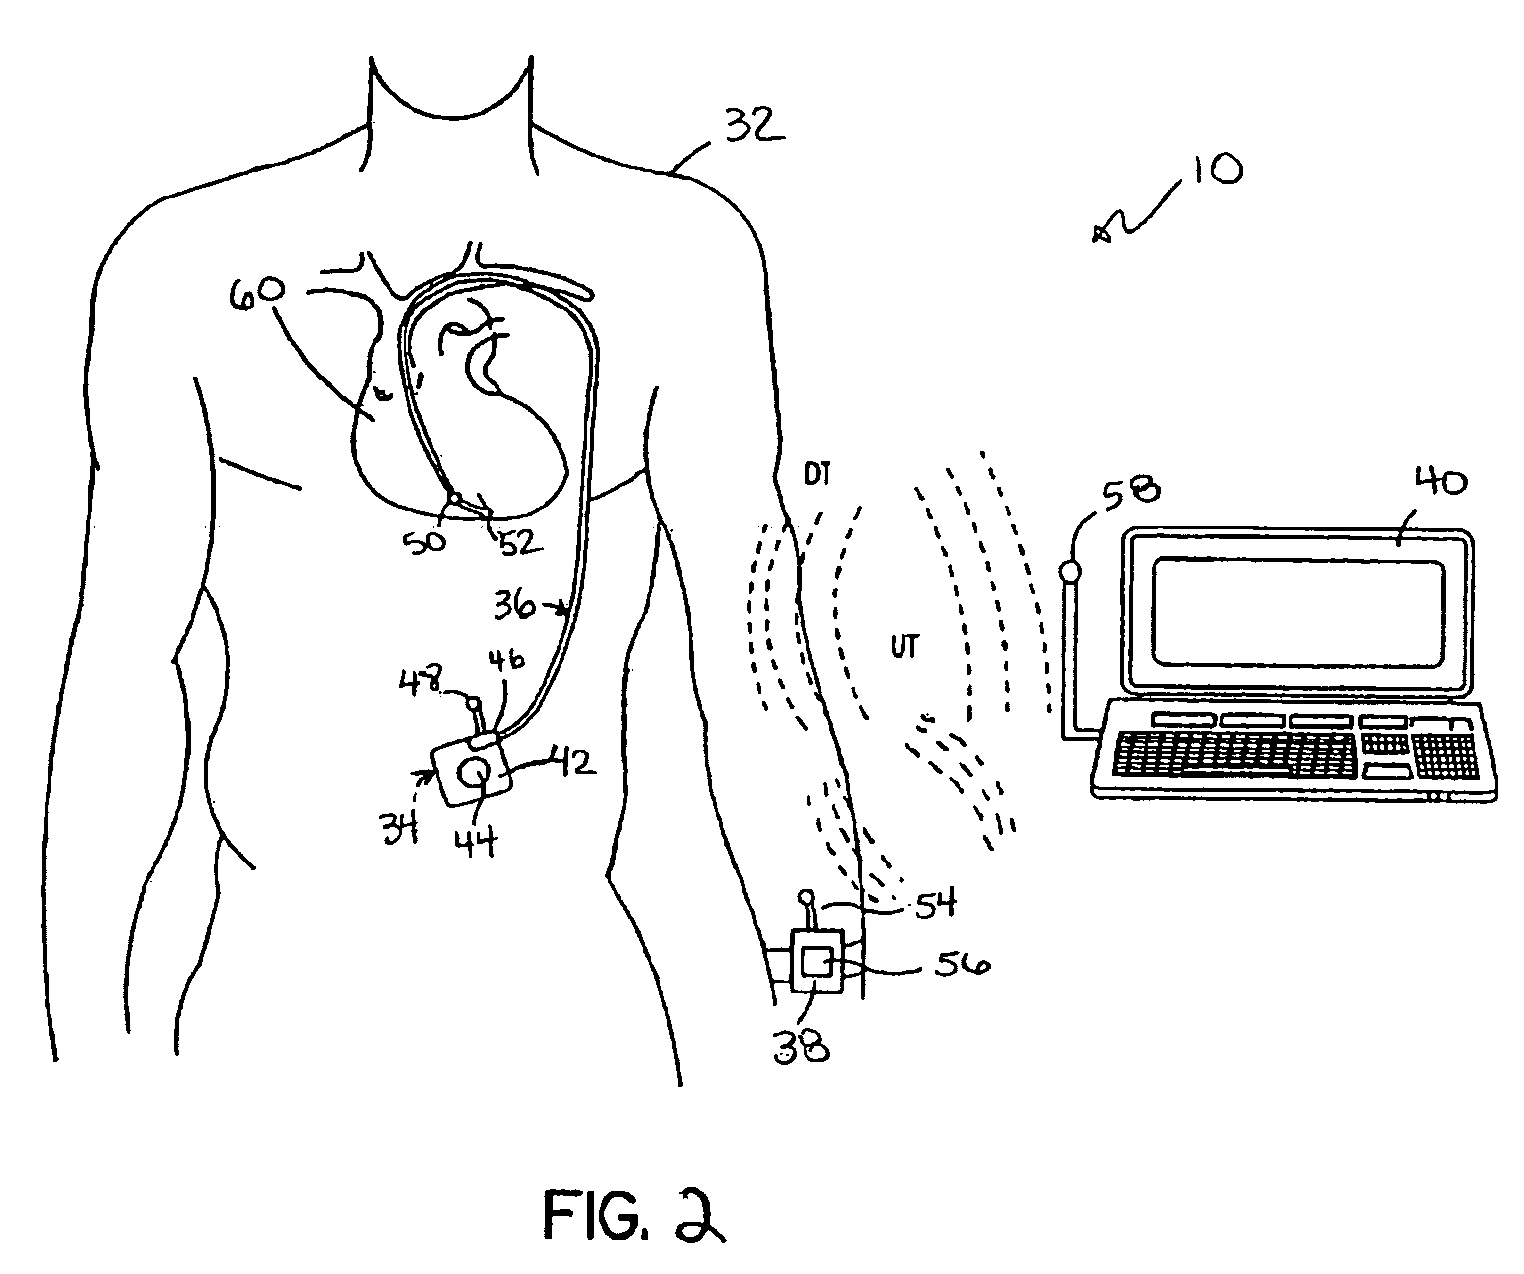 System and method for monitoring myocardial performance using sensed ventricular pressures